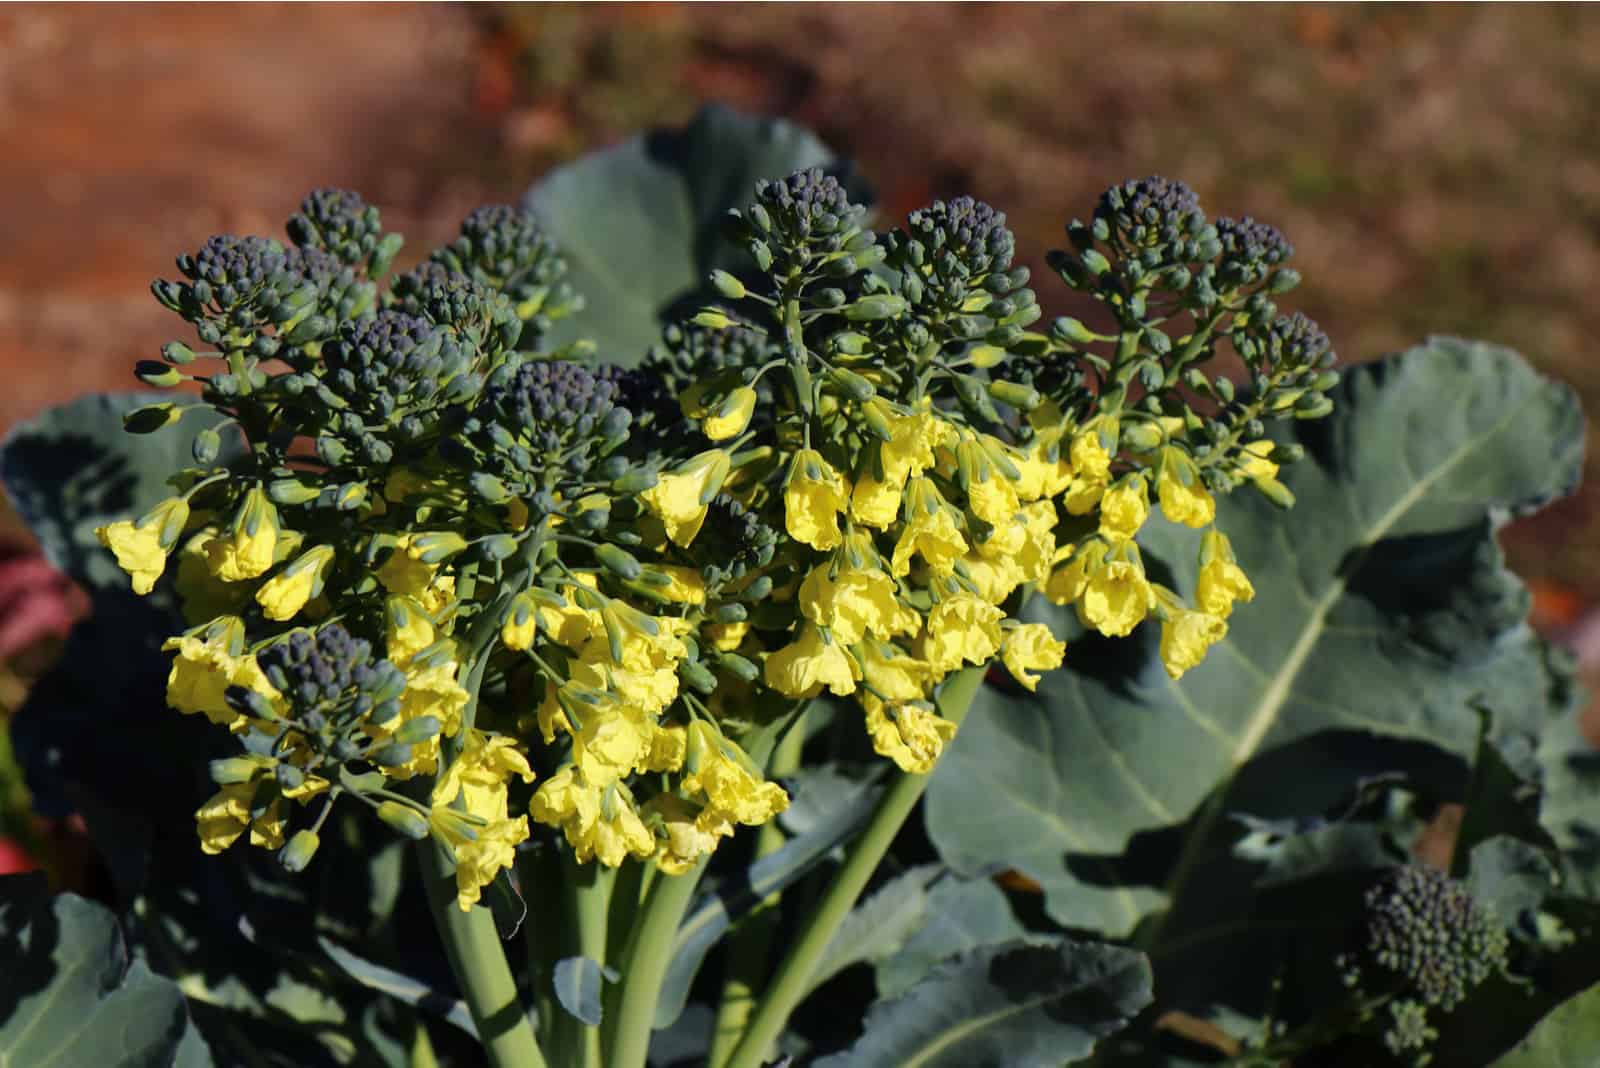 yellow flowers blooming on broccoli